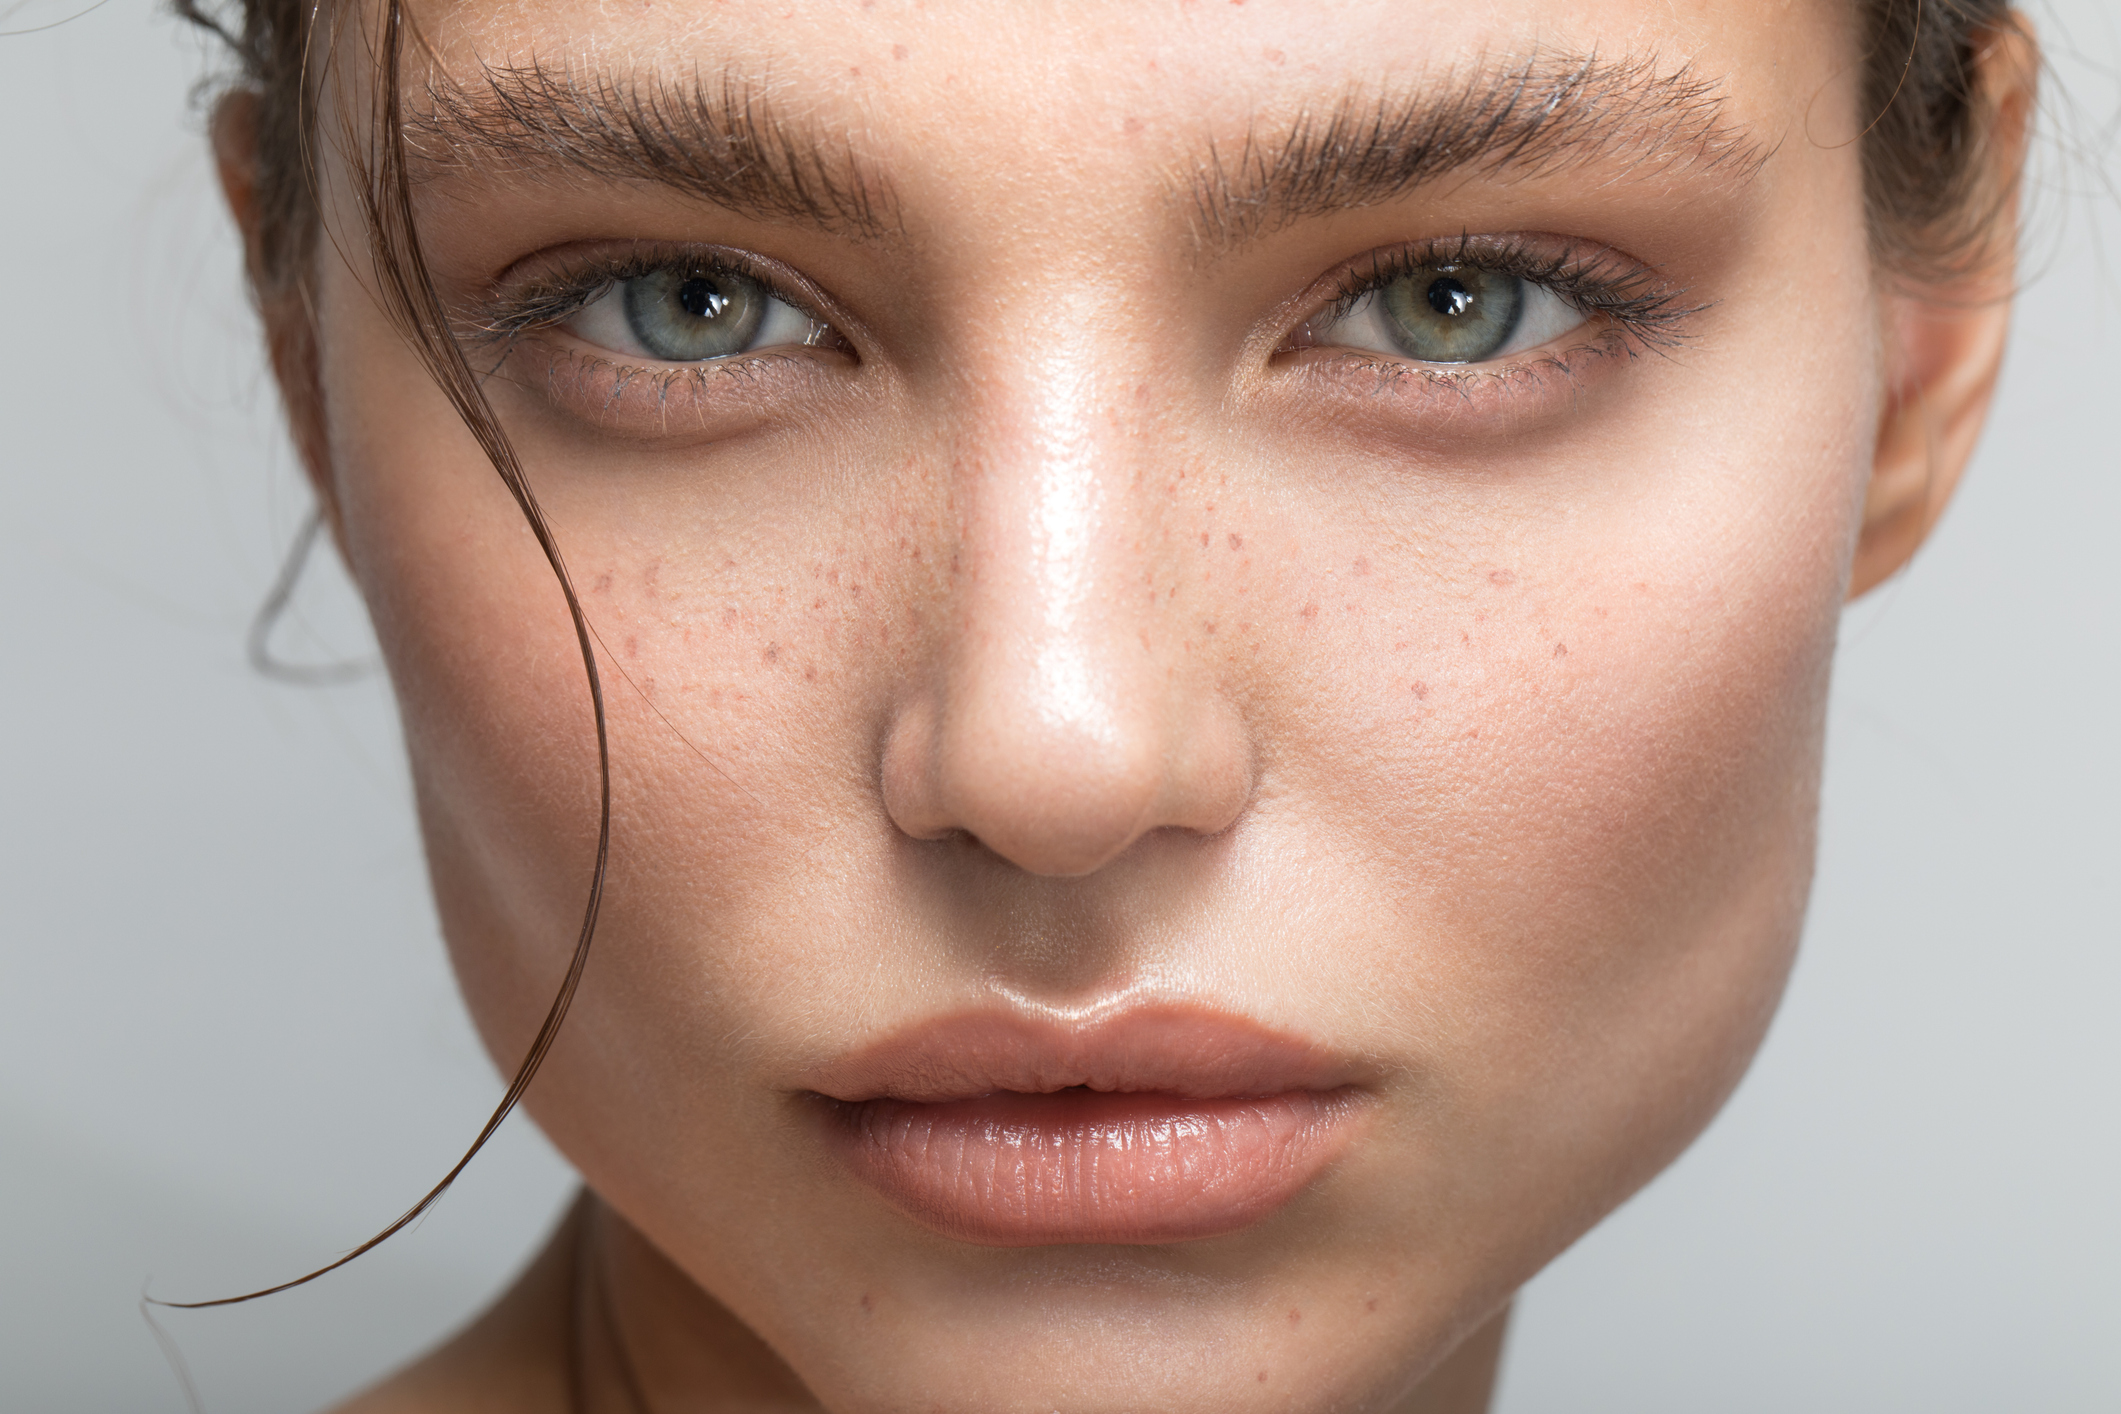 Bloom Facial Plastic Surgery Blog | The Dos and Don'ts of Dermal Fillers